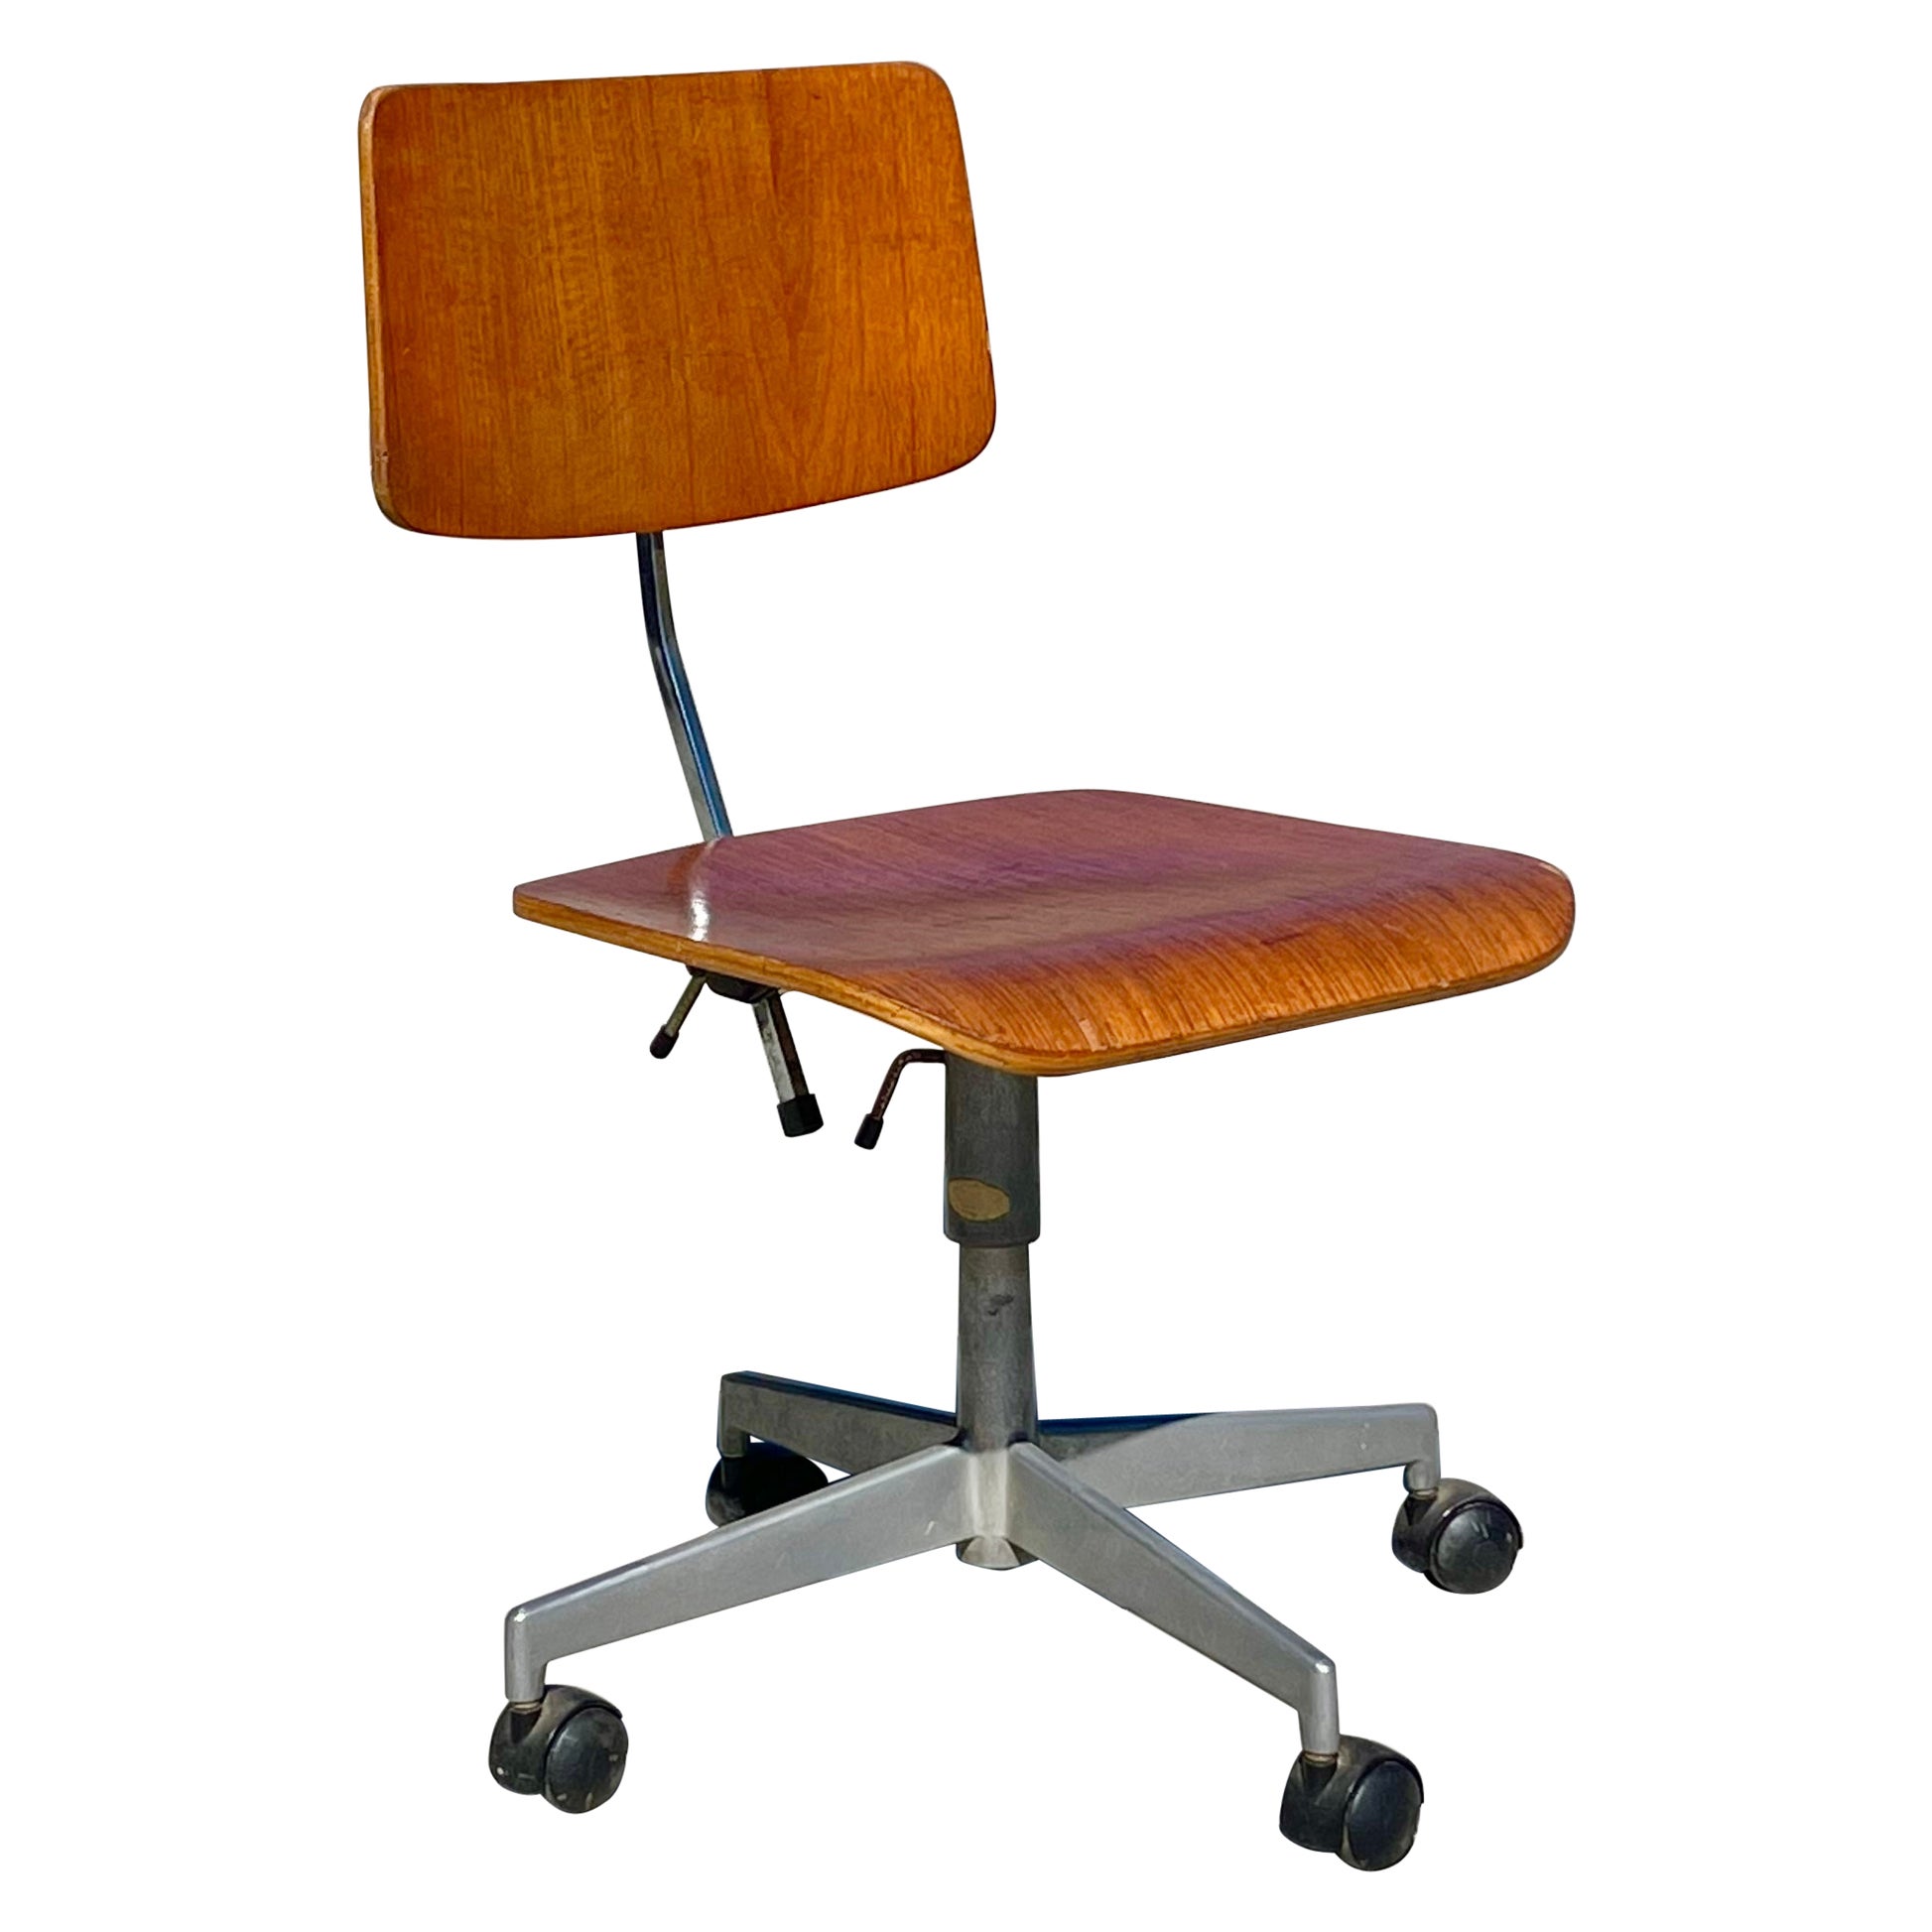 1950s Mid Century Modern Office Chair by Jorge Rasmussen For Sale